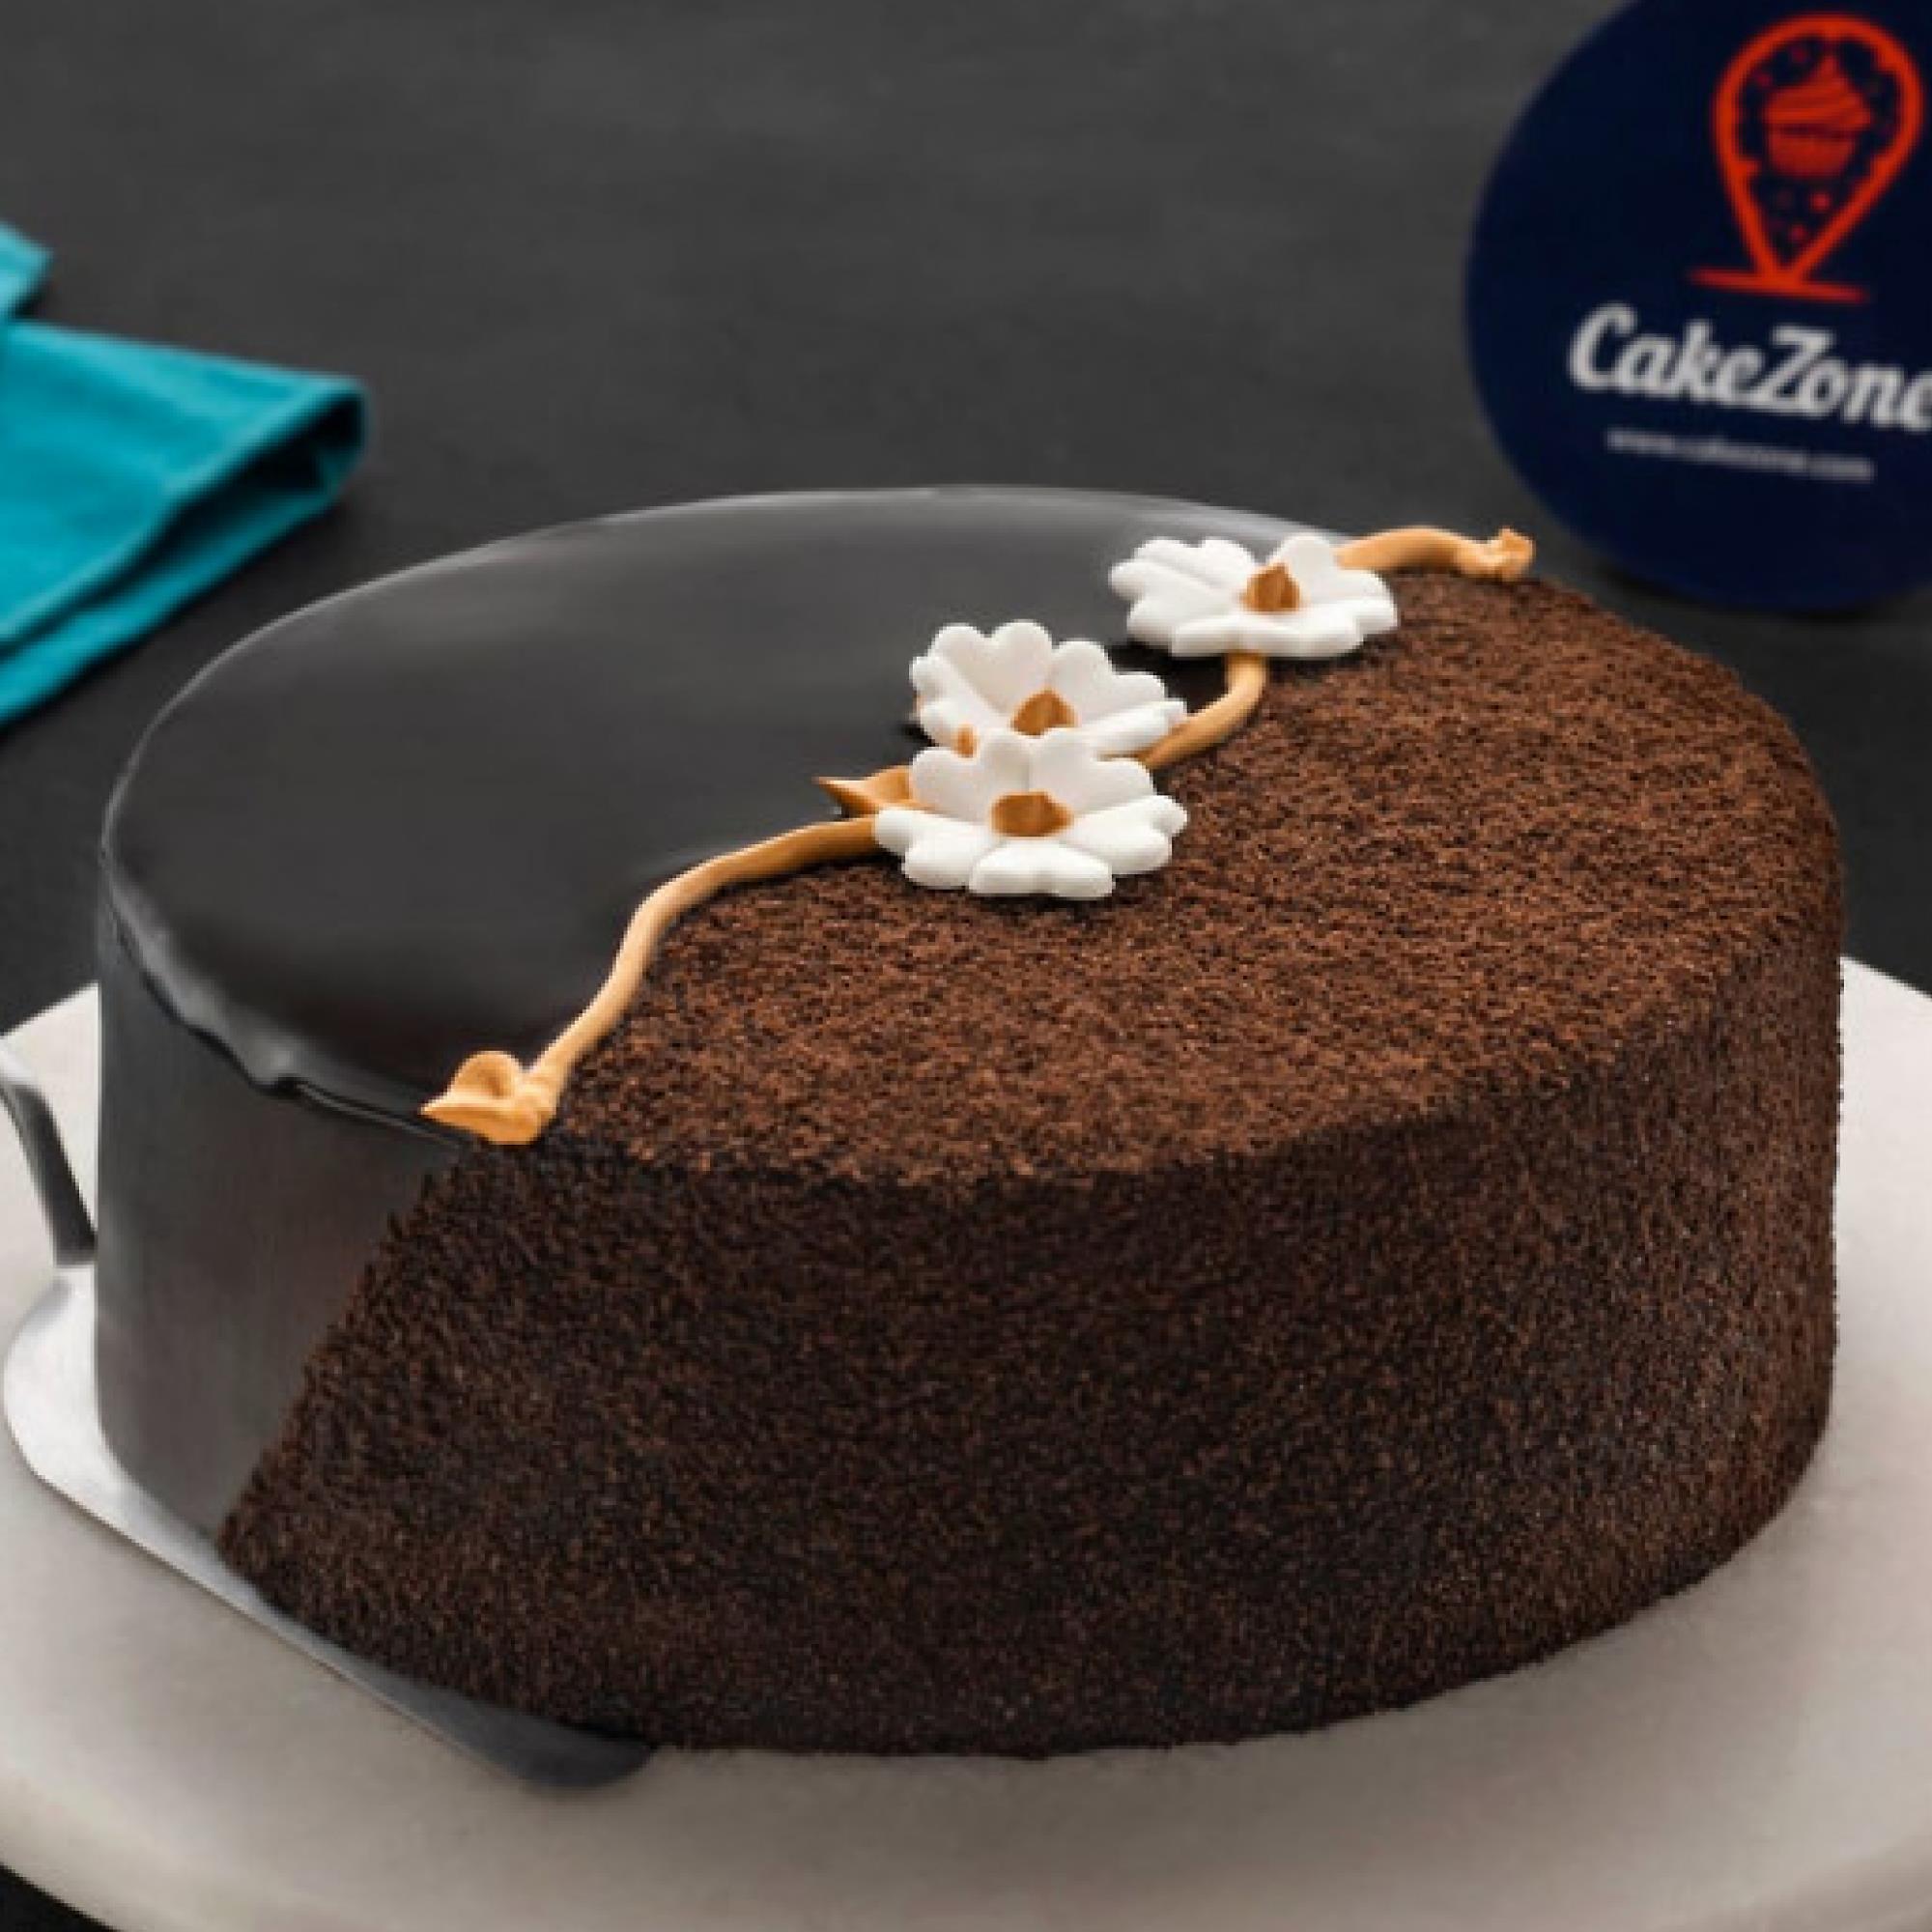 The Best Way to Surprise Your Loved Ones with Online Cake Delivery in Mumbai  - CakeZone Blog